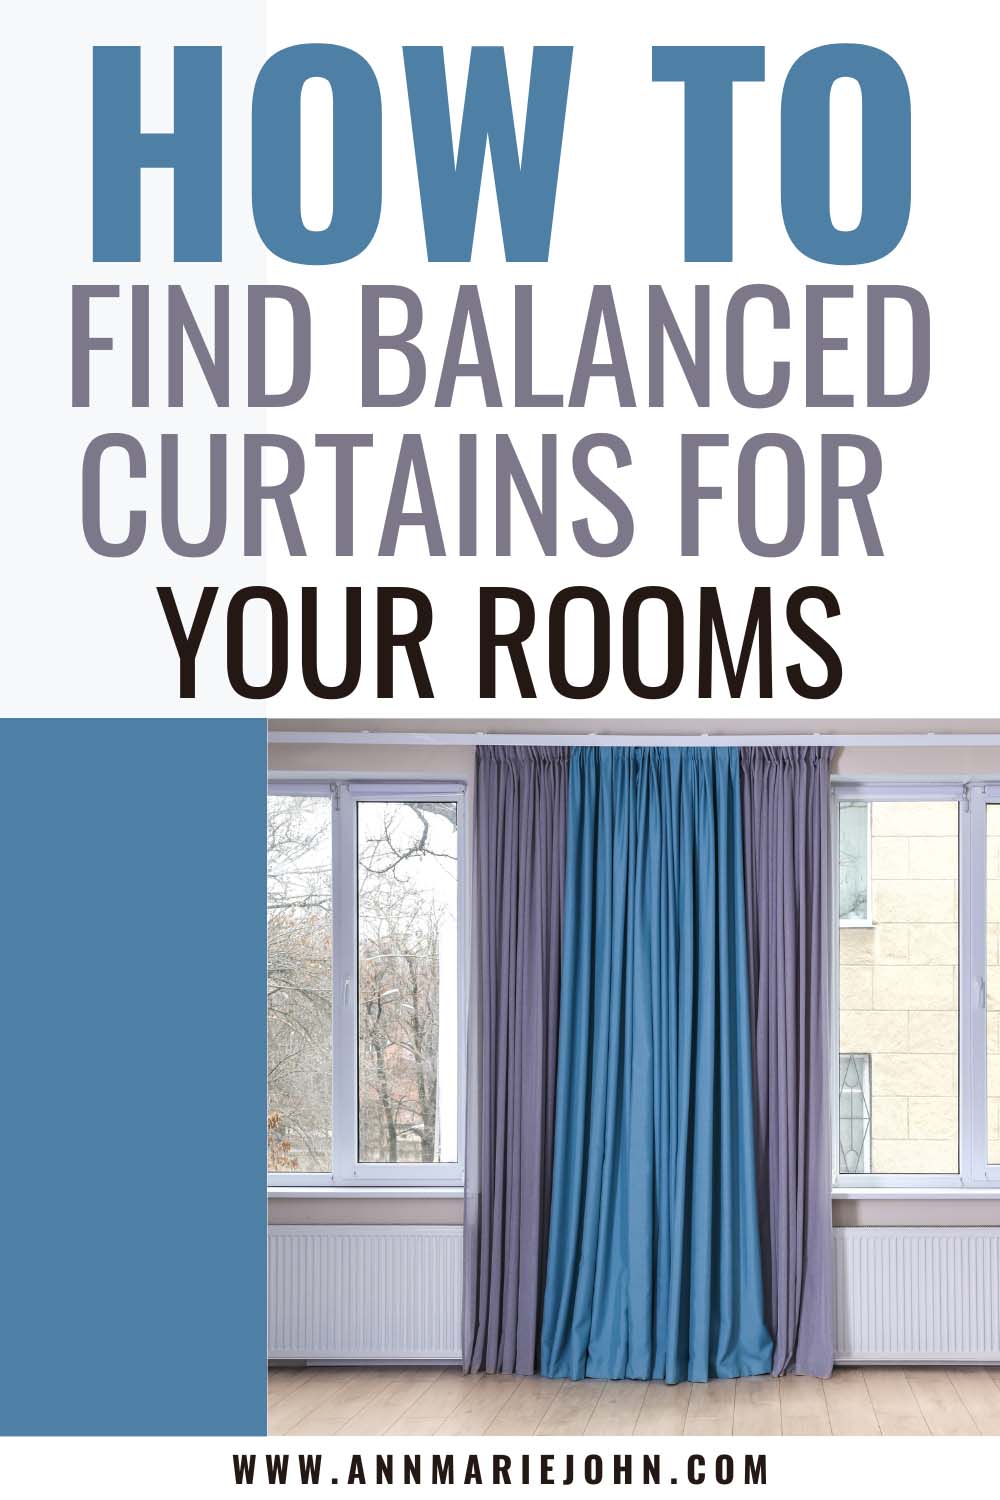 How To Find Balanced Curtains For Your Rooms